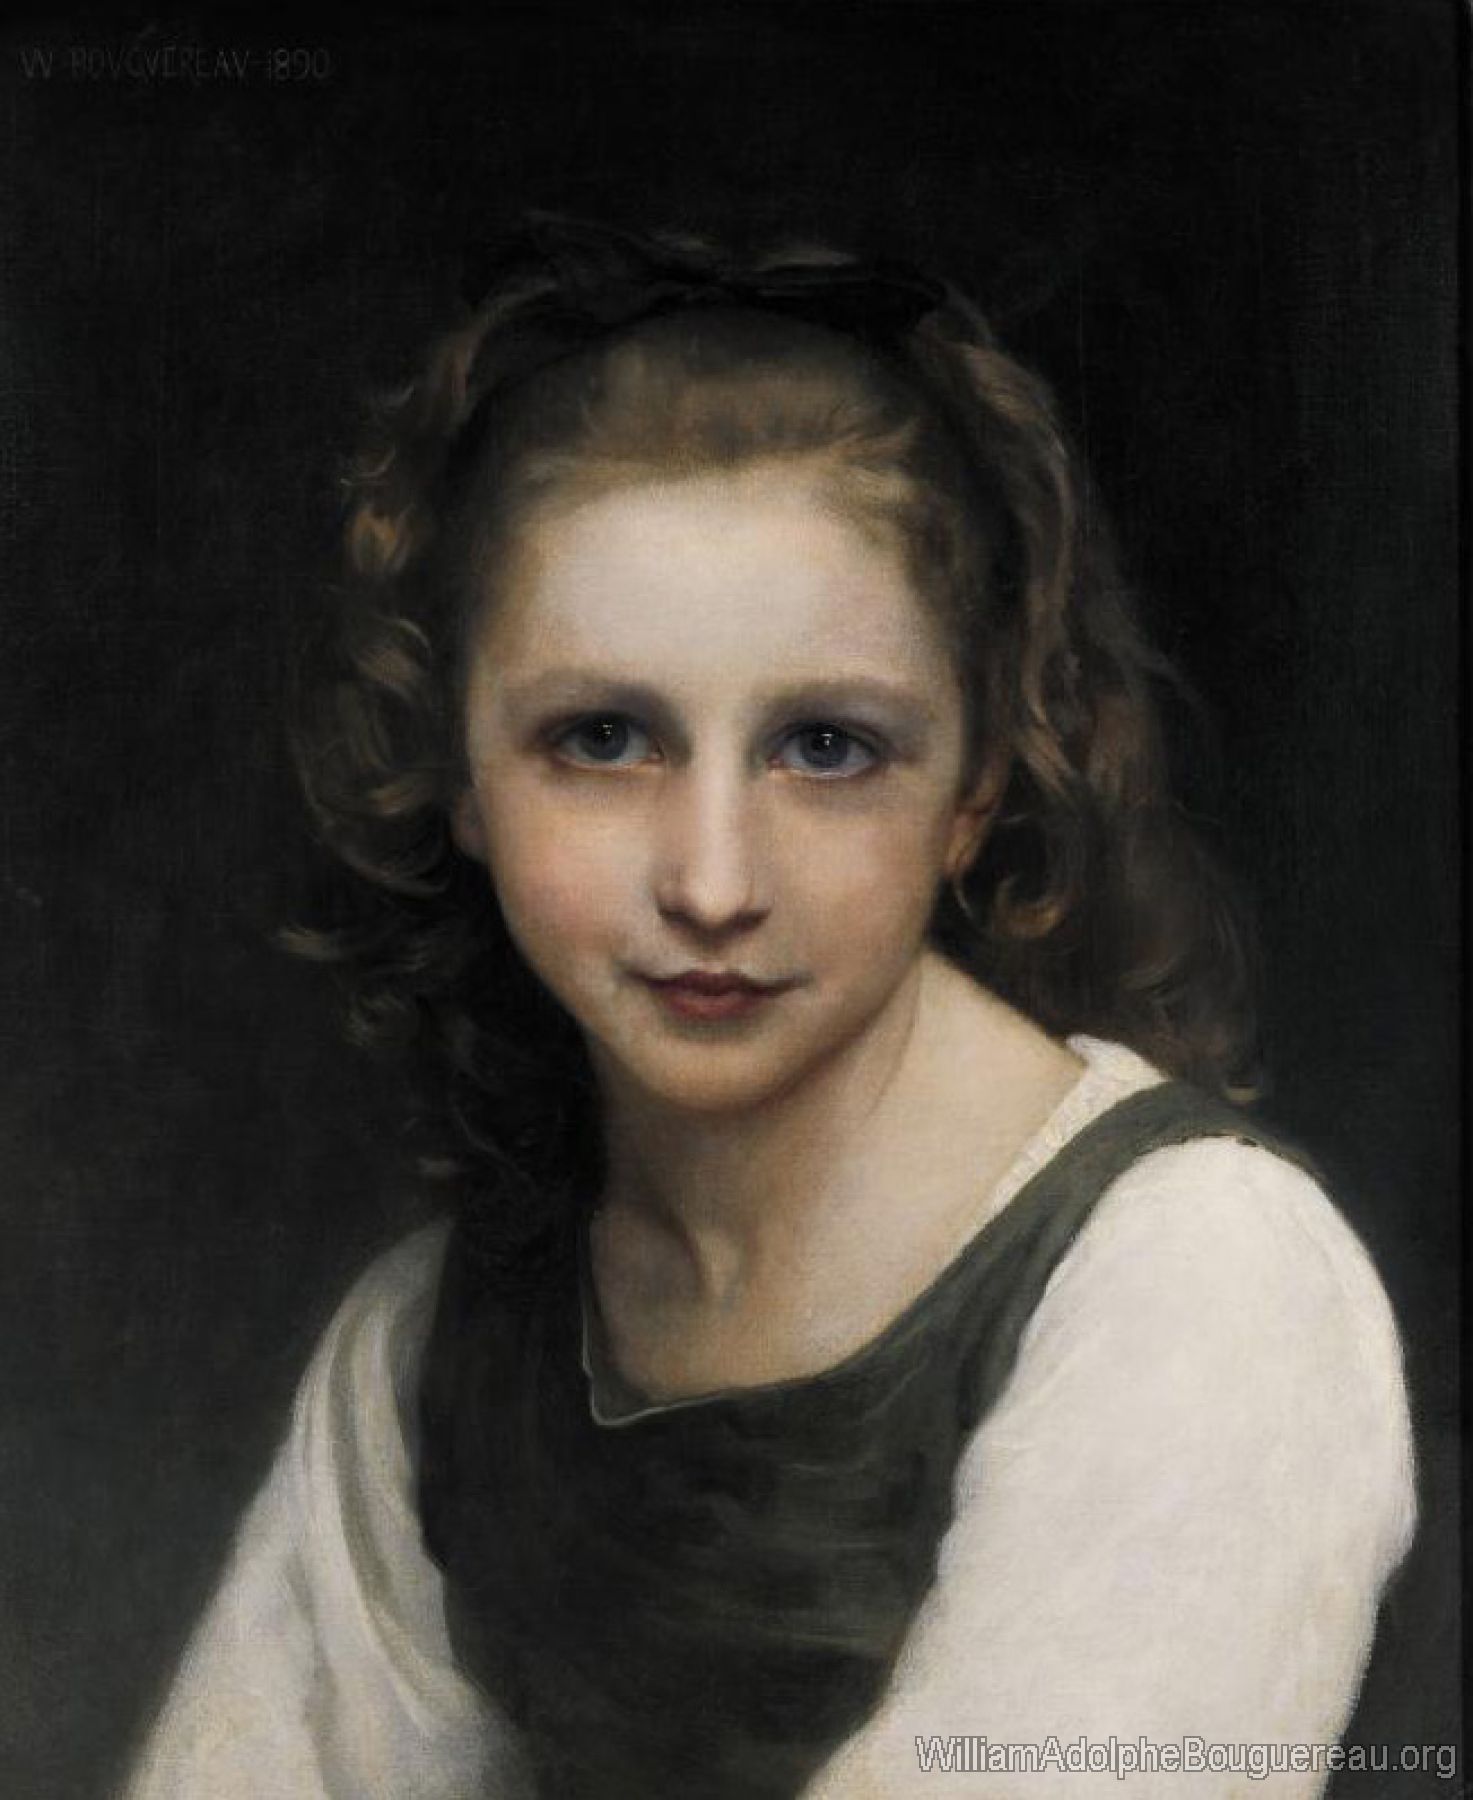 Portrait of a Young Girl II